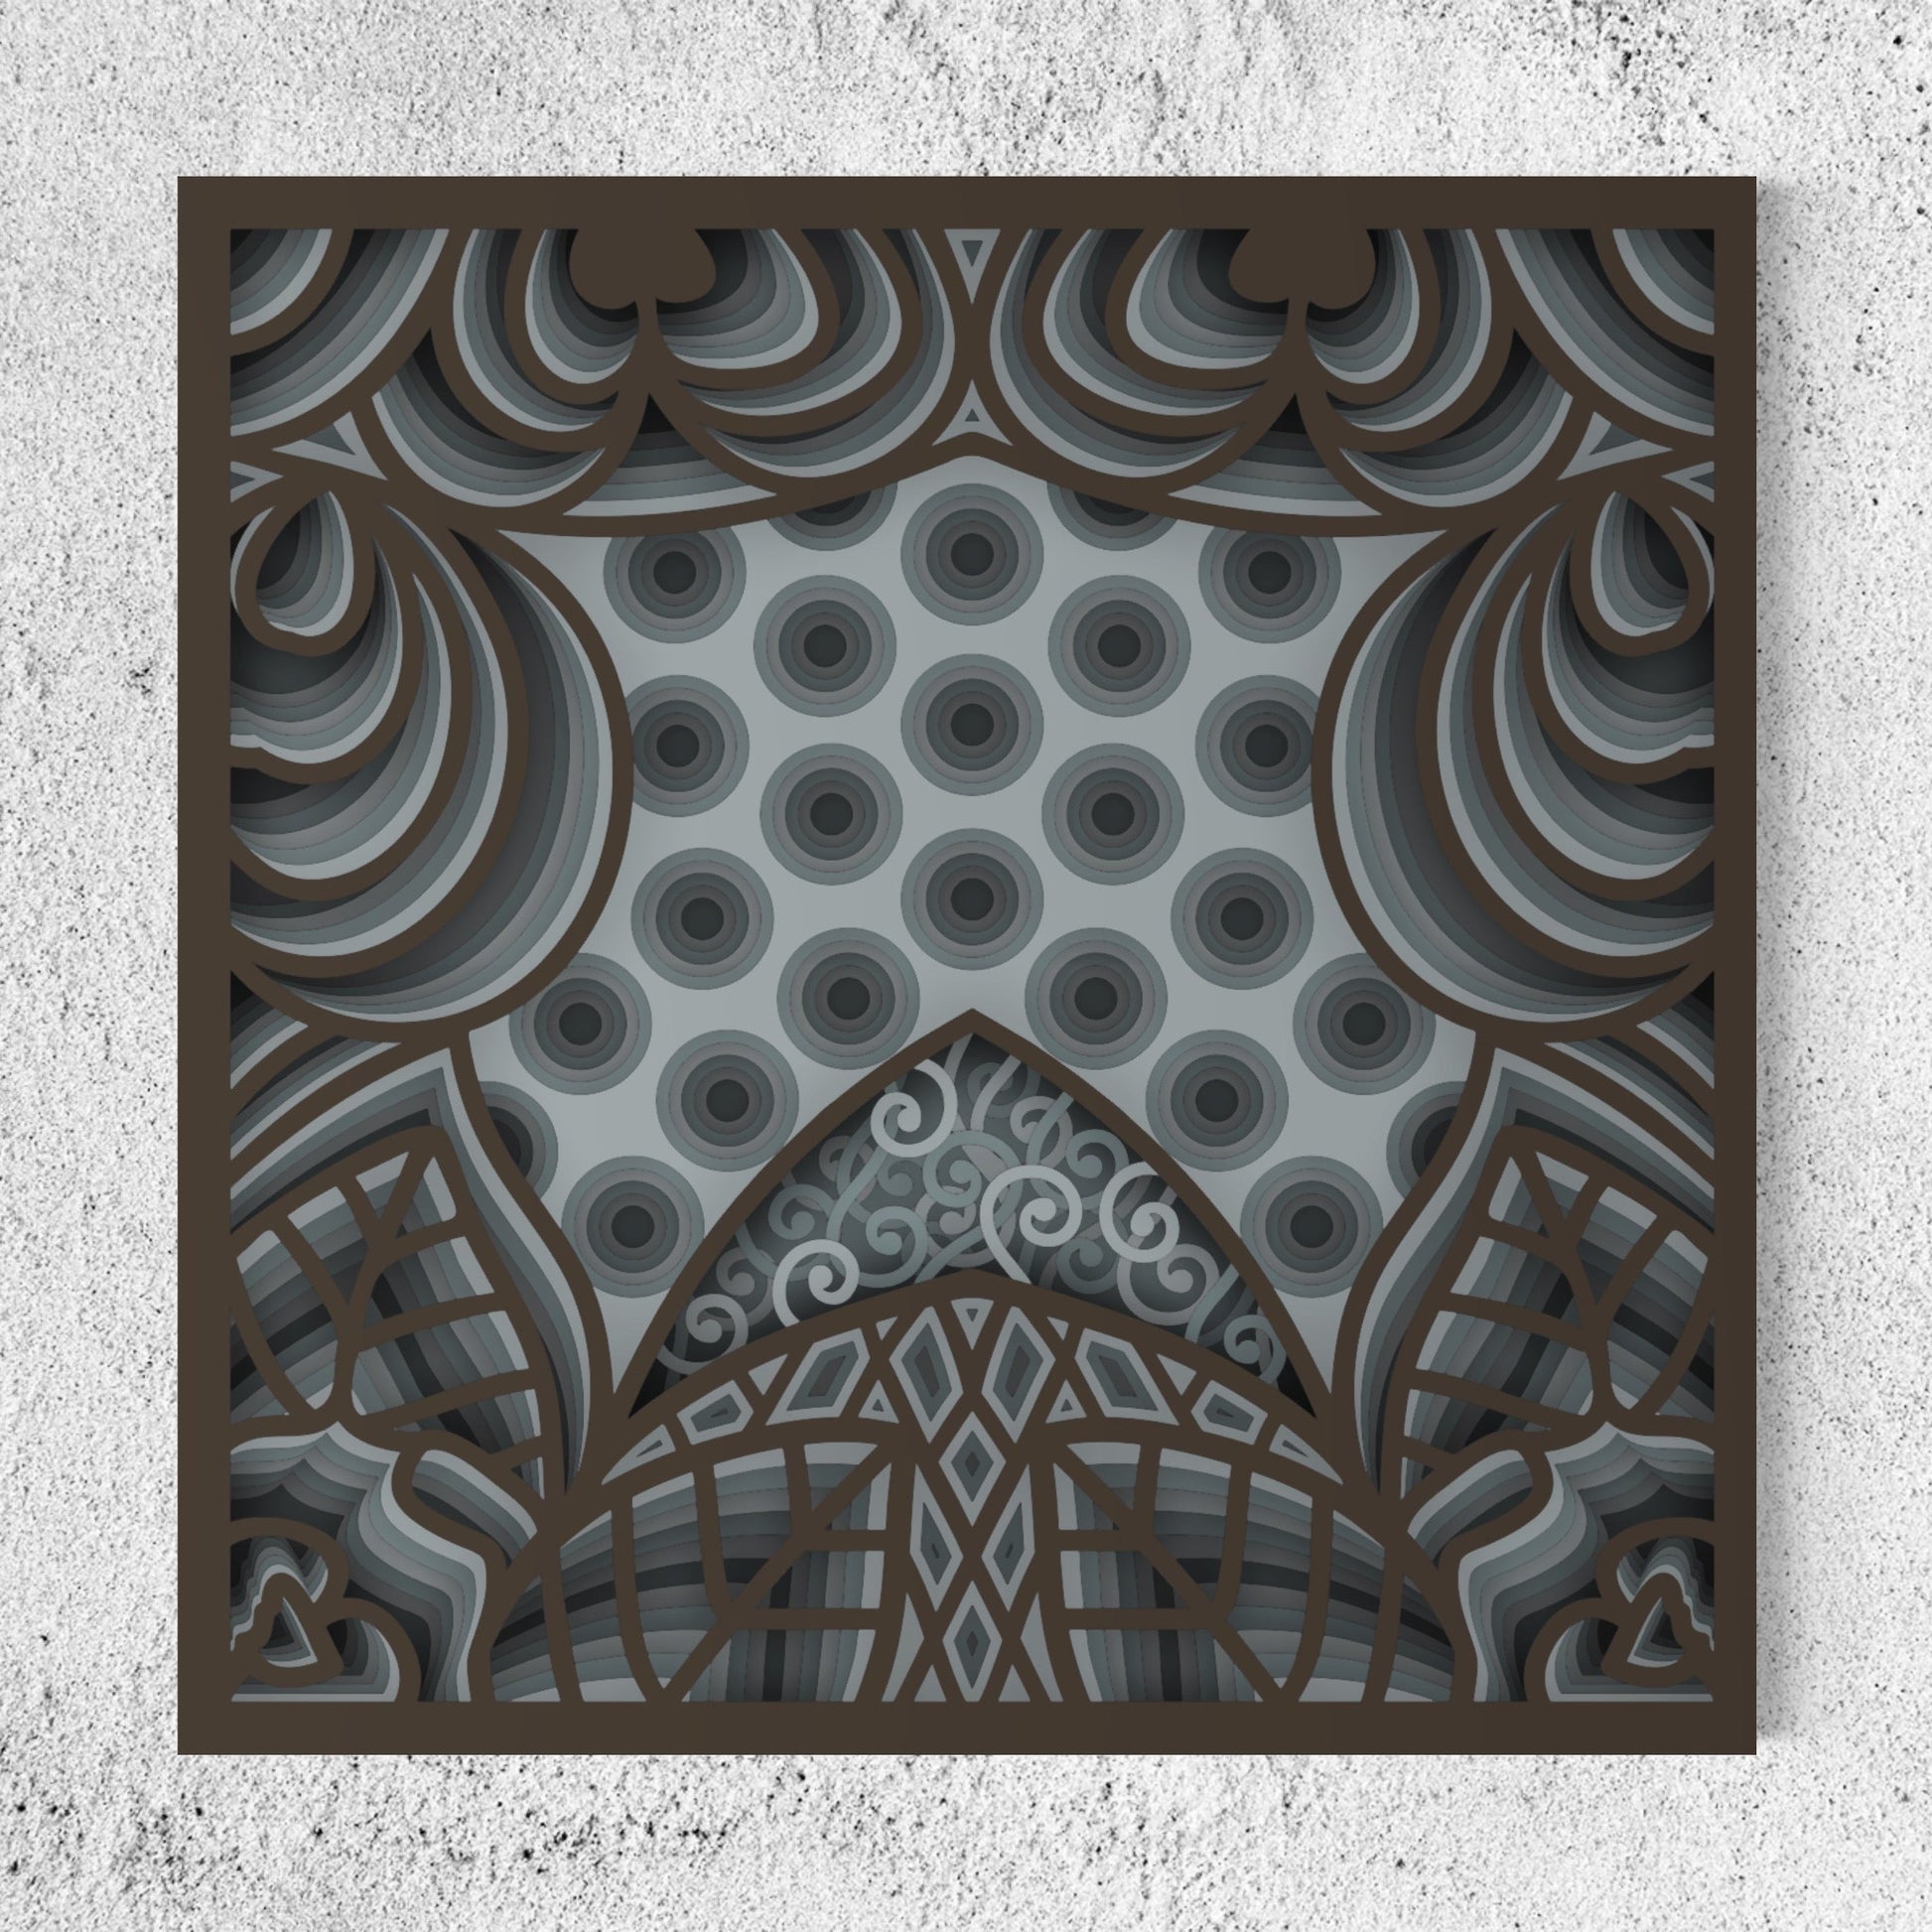 Ace of Spade Wooden Wall Art | 15 x 15 Inch | Color Woody Brown, Cool Grey and Dark Grey